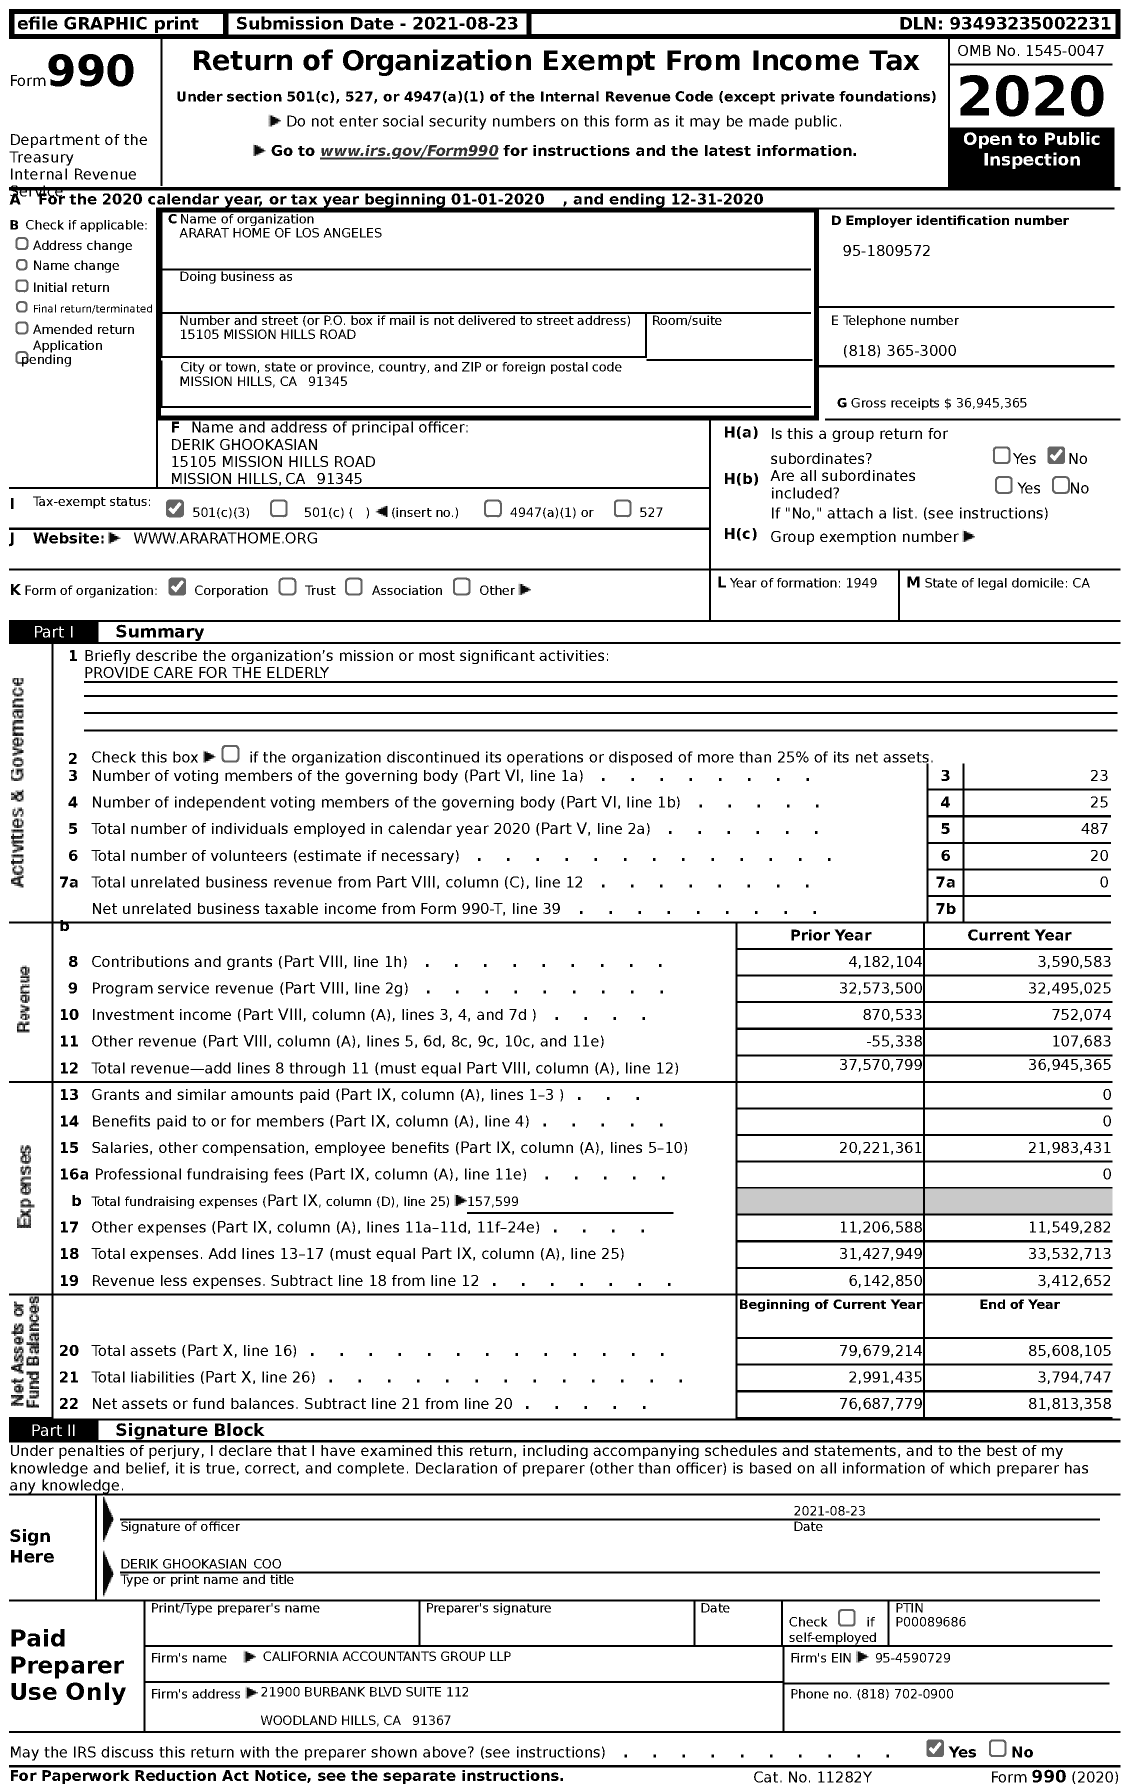 Image of first page of 2020 Form 990 for Ararat Home of Los Angeles